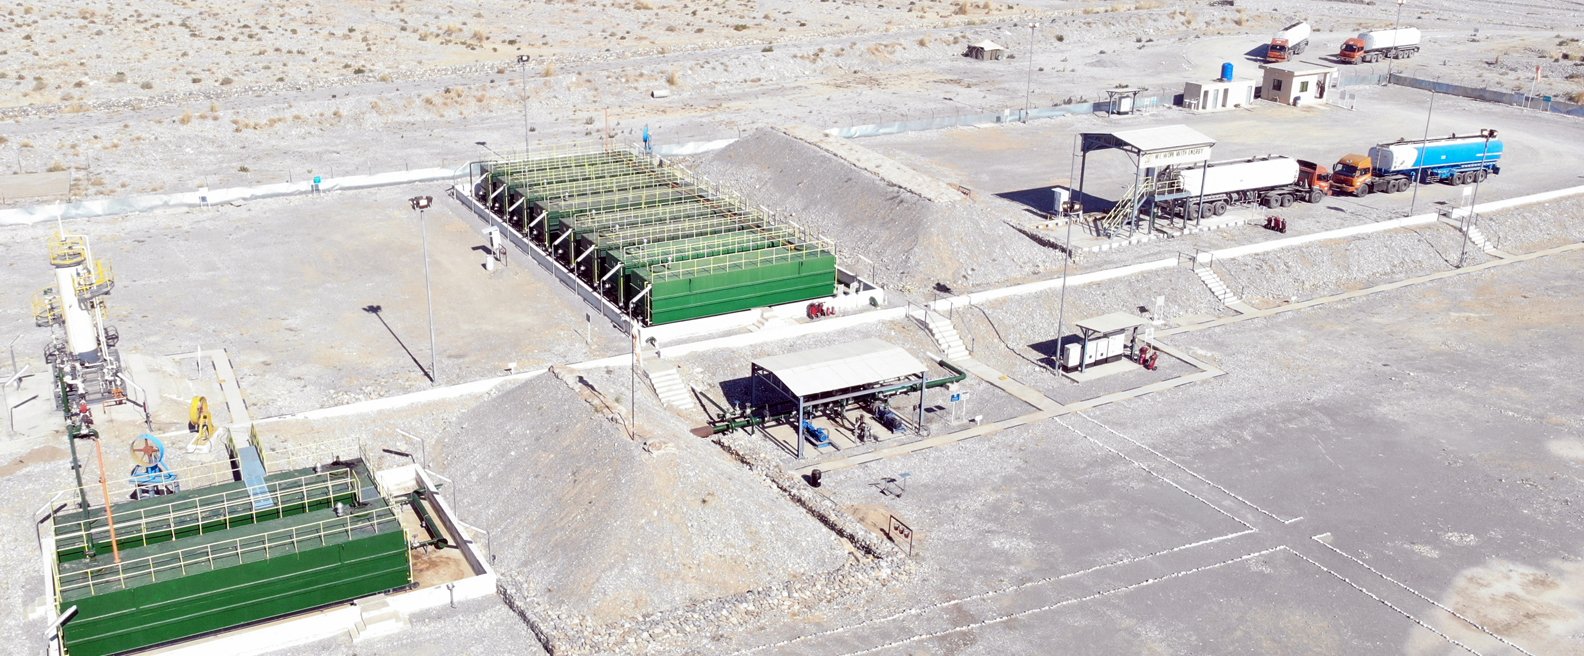 Early Production Facility at Bolan East-1 (ST-1), Ziarat Block, a joint venture of MPCL, as operator, and PPL-Europe